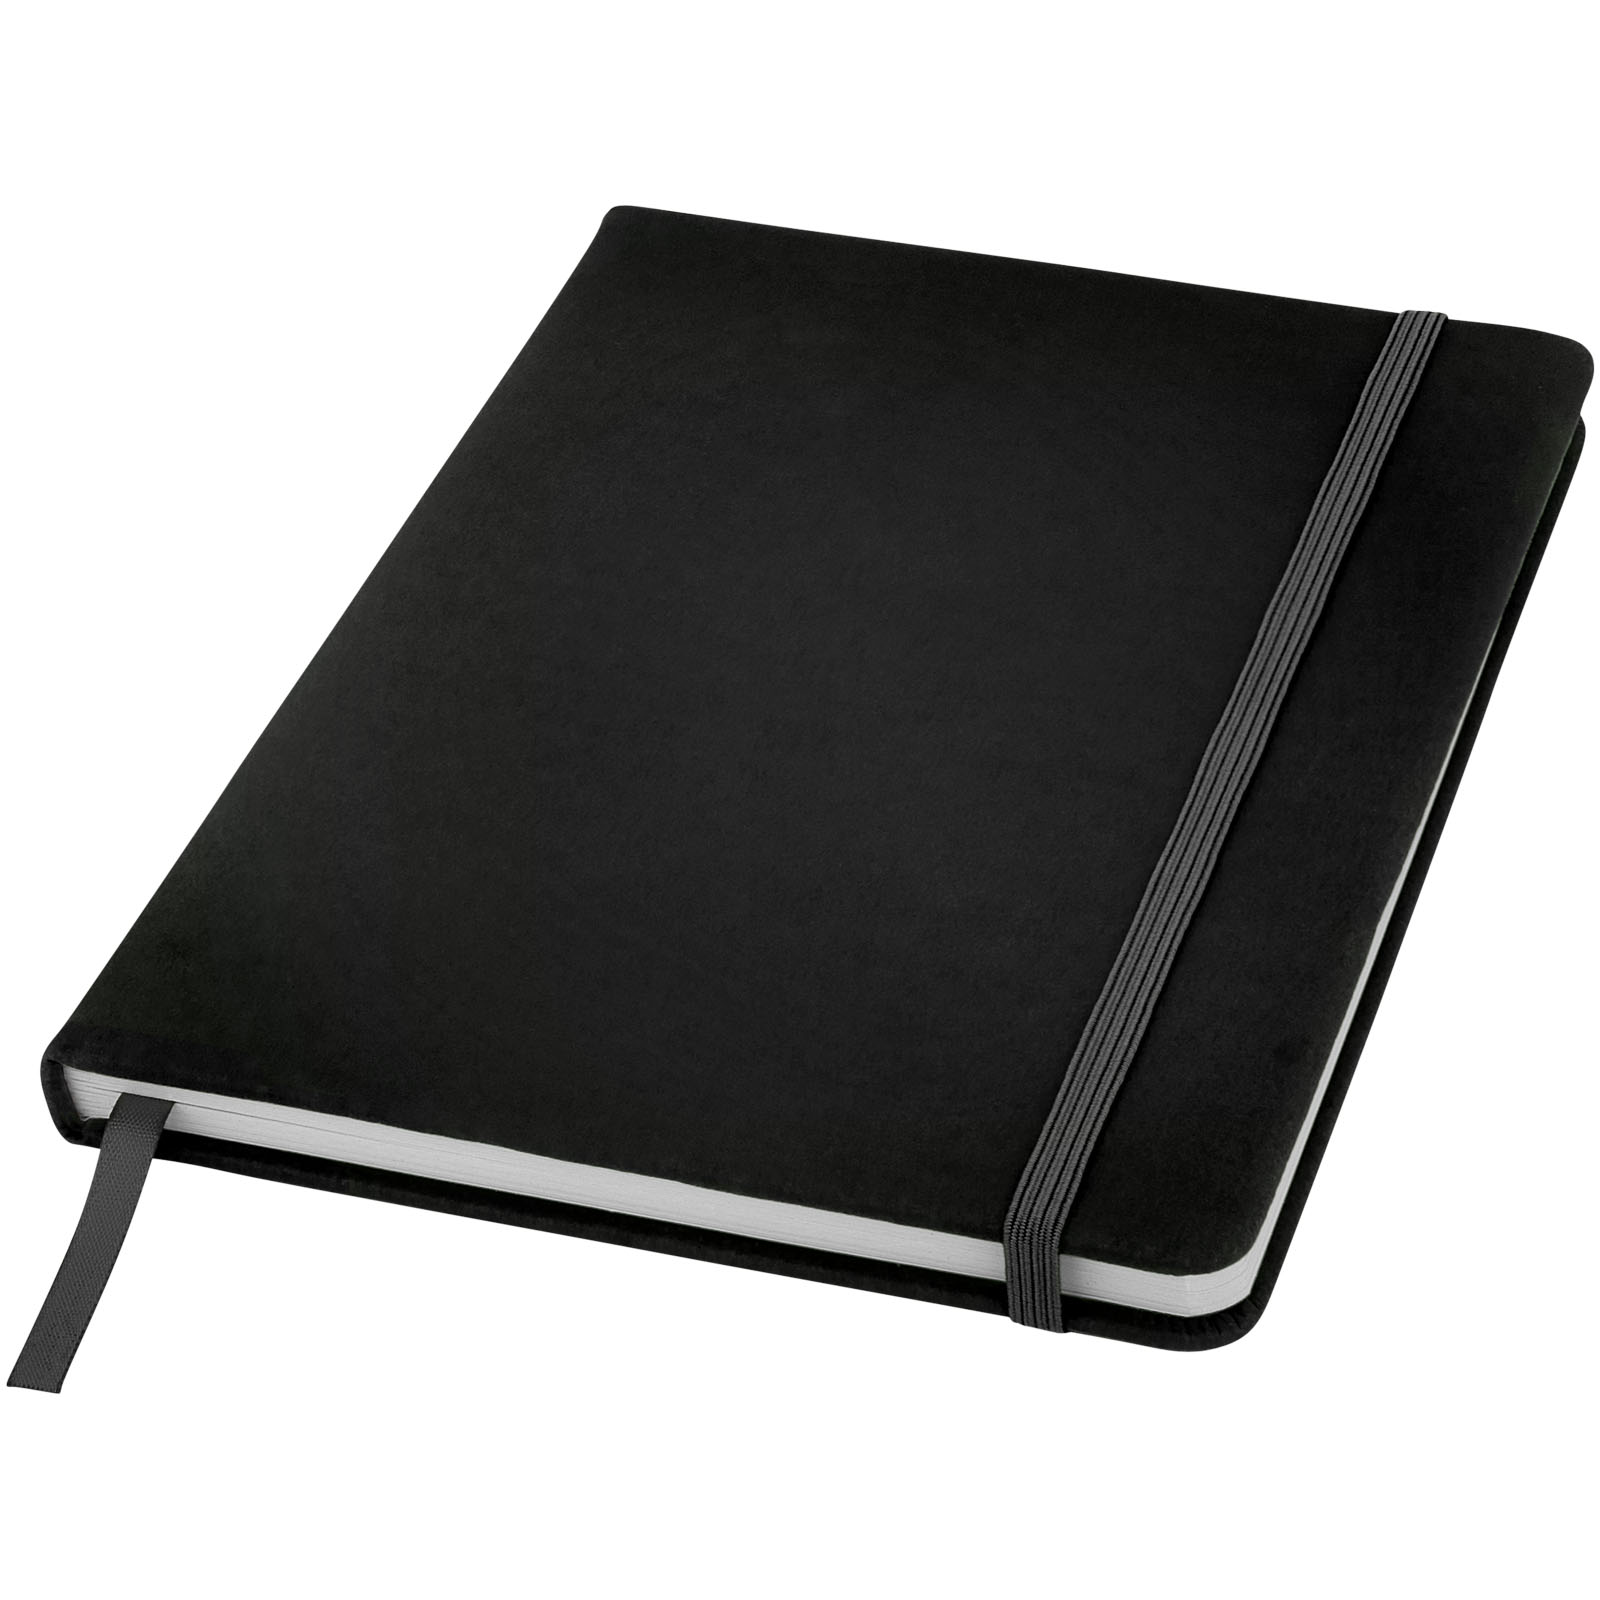 Advertising Hard cover notebooks - Spectrum A5 notebook with blank pages